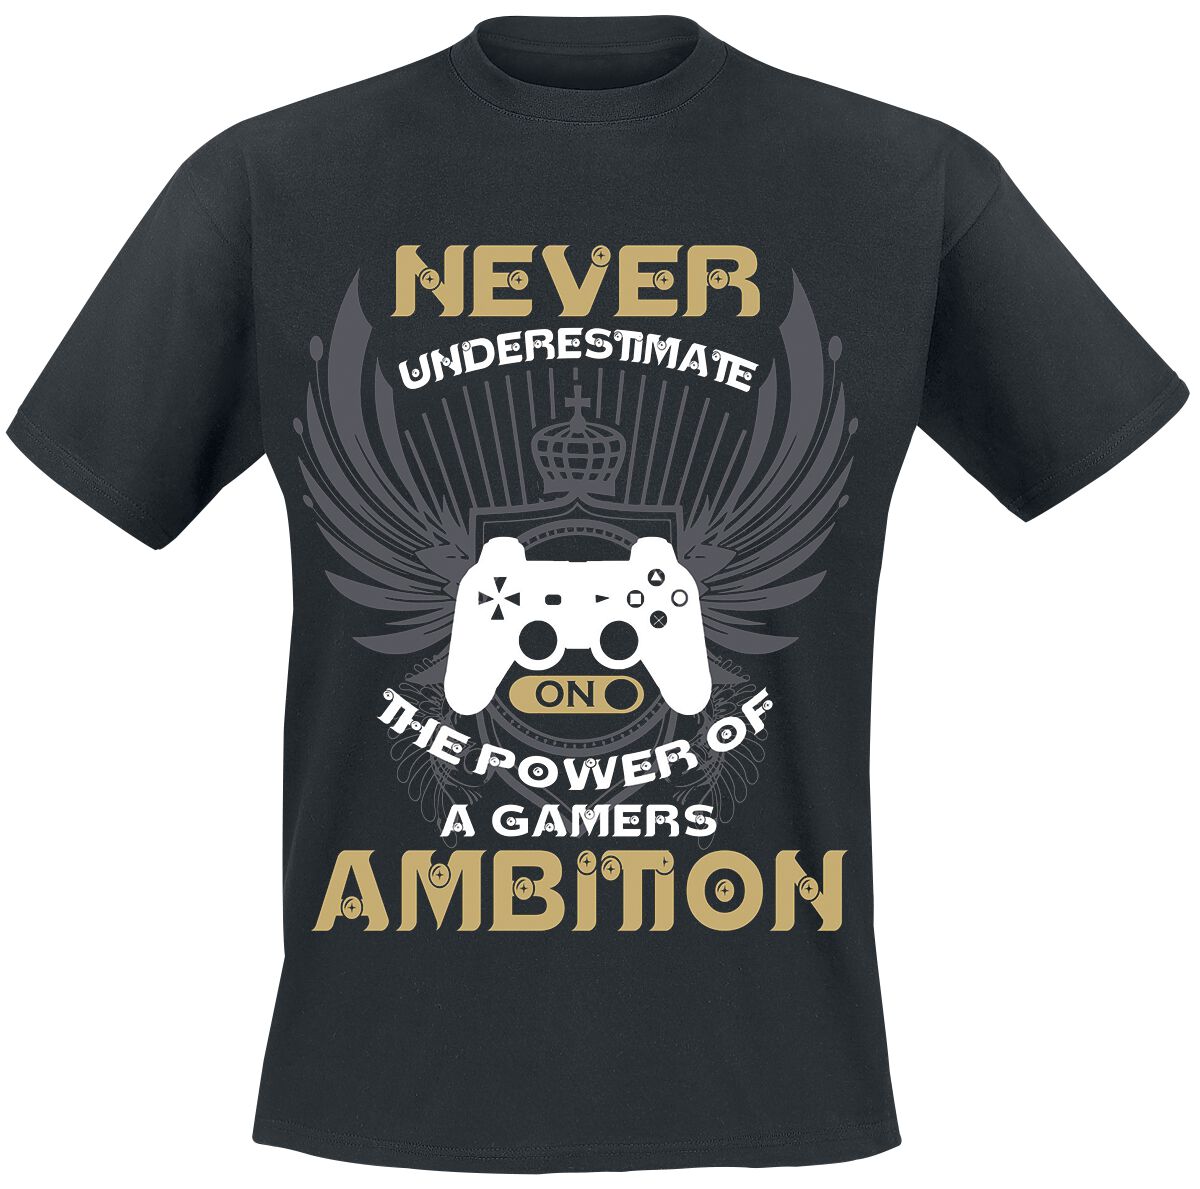 Fun Shirt Never Underestimate The Power of a Gamer's Ambition T-Shirt black